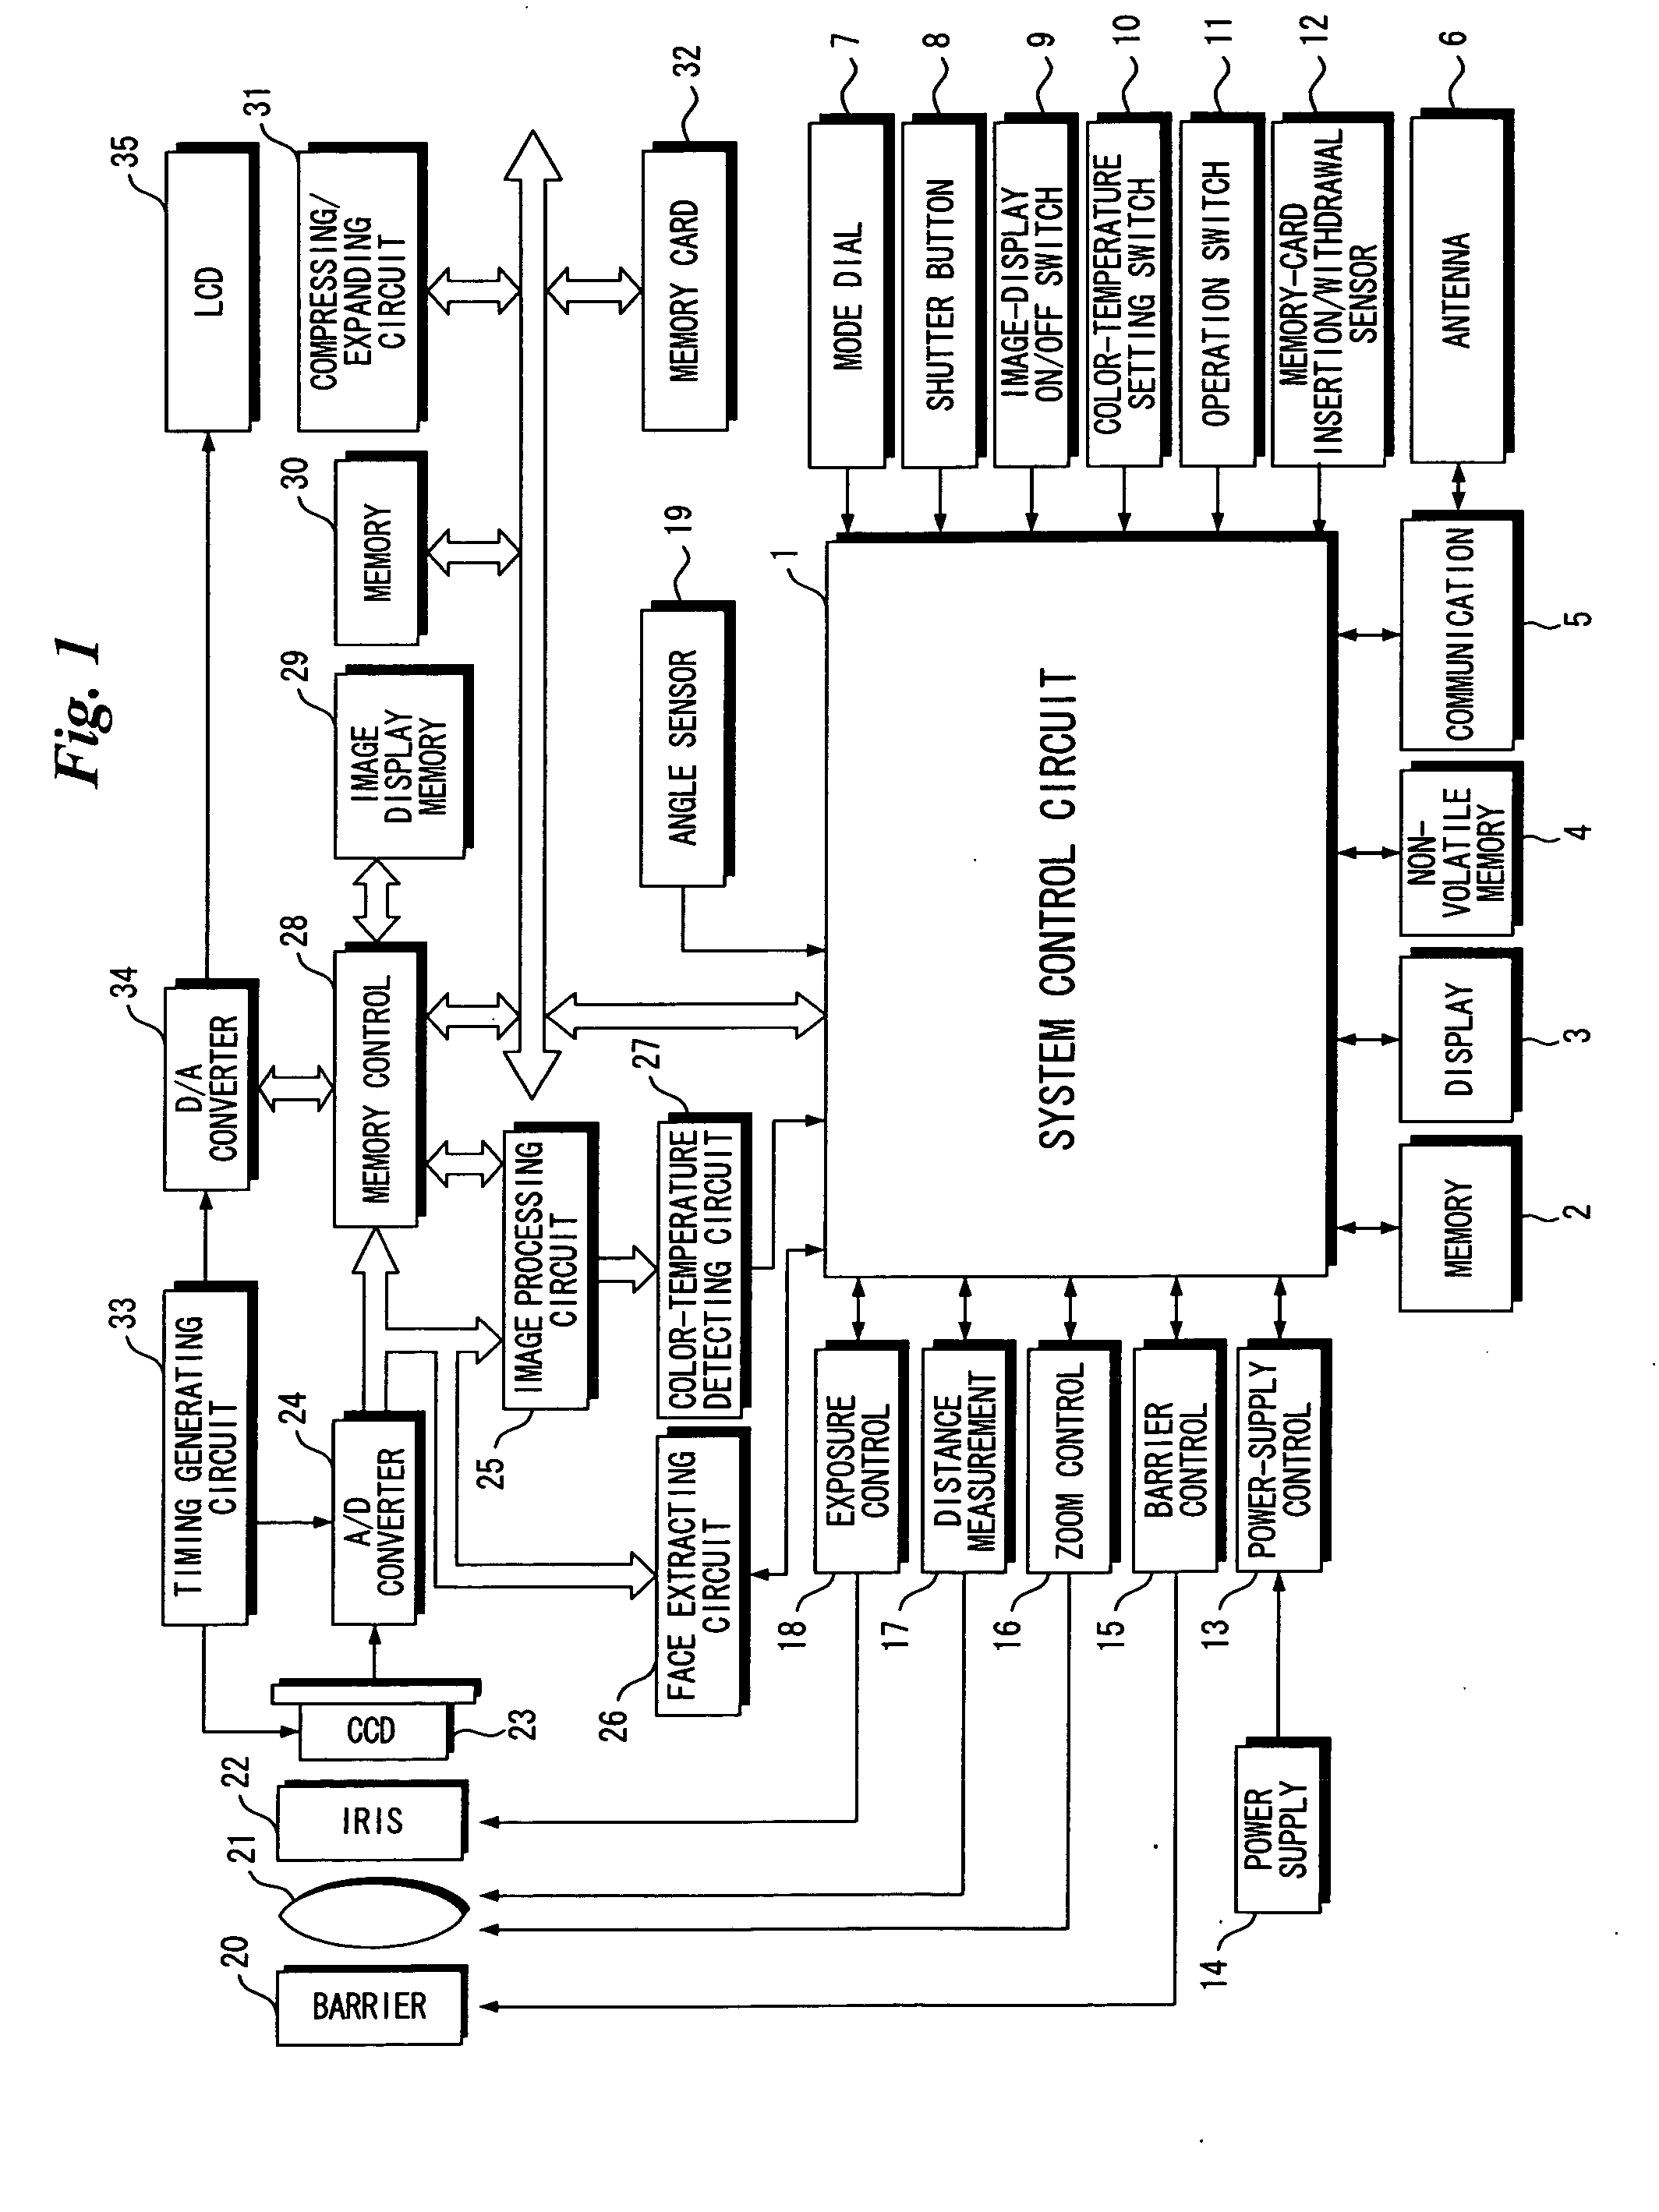 Target-image search apparatus, digital camera and methods of controlling same